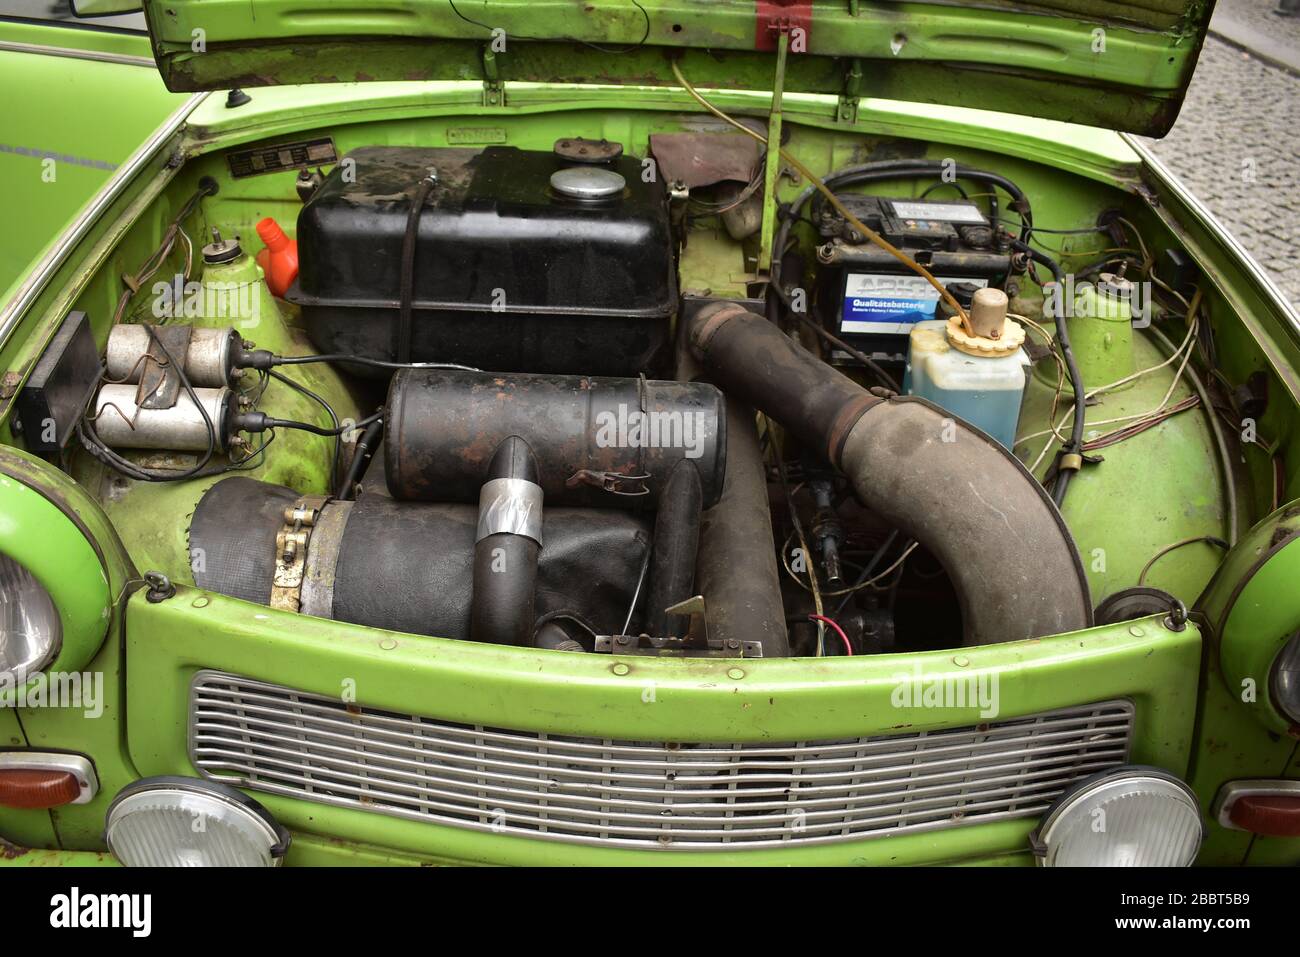 Engine of a Green Trabant 601 Vintage car from above Berlin Stock Photo -  Alamy